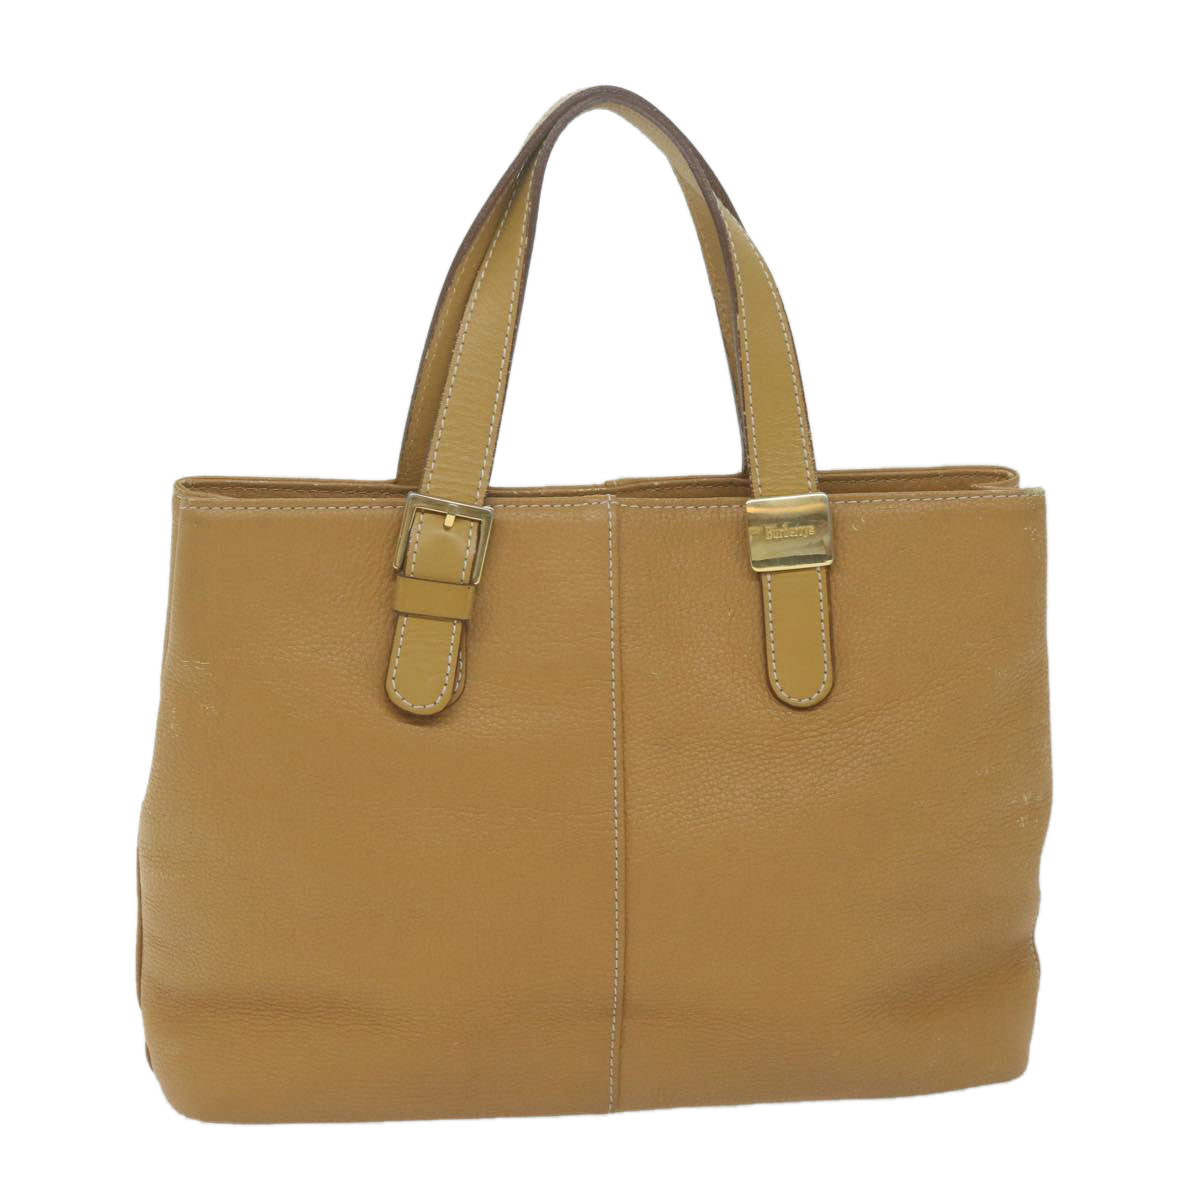 Burberrys Tote Bag Leather Beige Auth fm3177